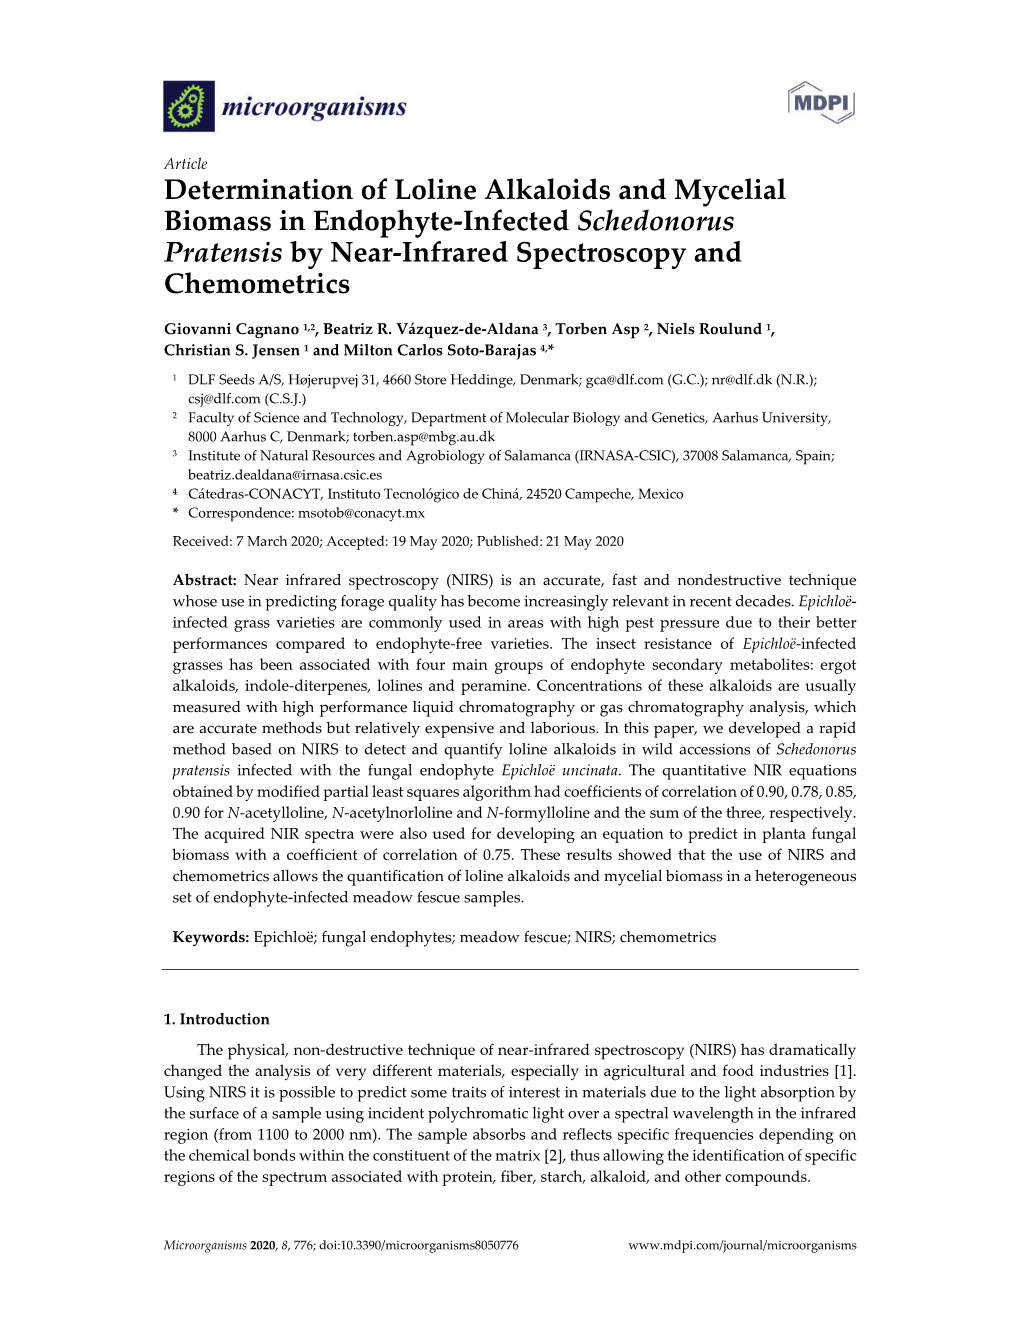 Determination of Loline Alkaloids and Mycelial Biomass in Endophyte-Infected Schedonorus Pratensis by Near-Infrared Spectroscopy and Chemometrics